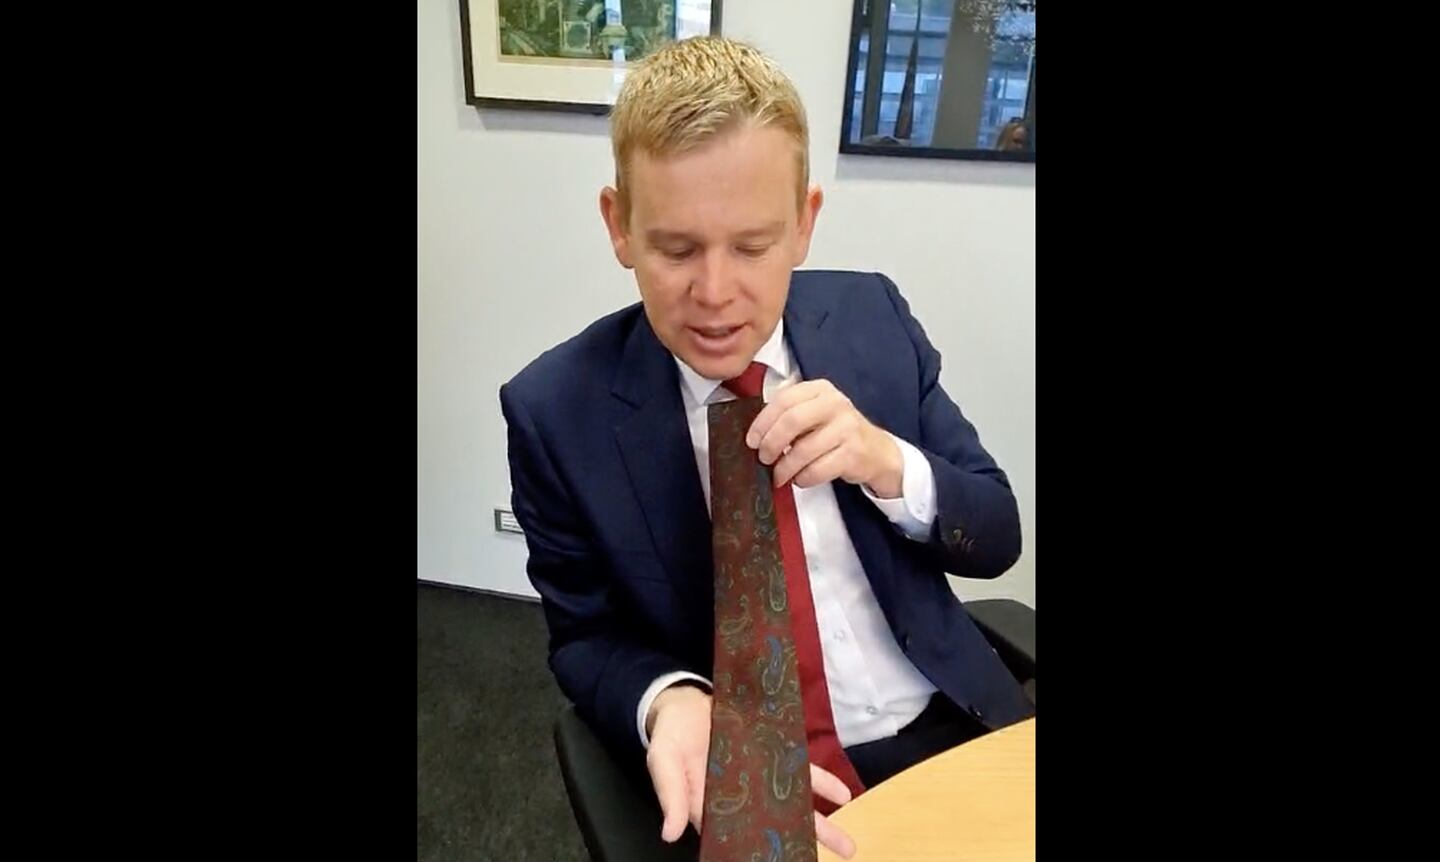 Hipkins gave Robertson a tie that belonged to the late Michael Cullen. Photo / Facebook